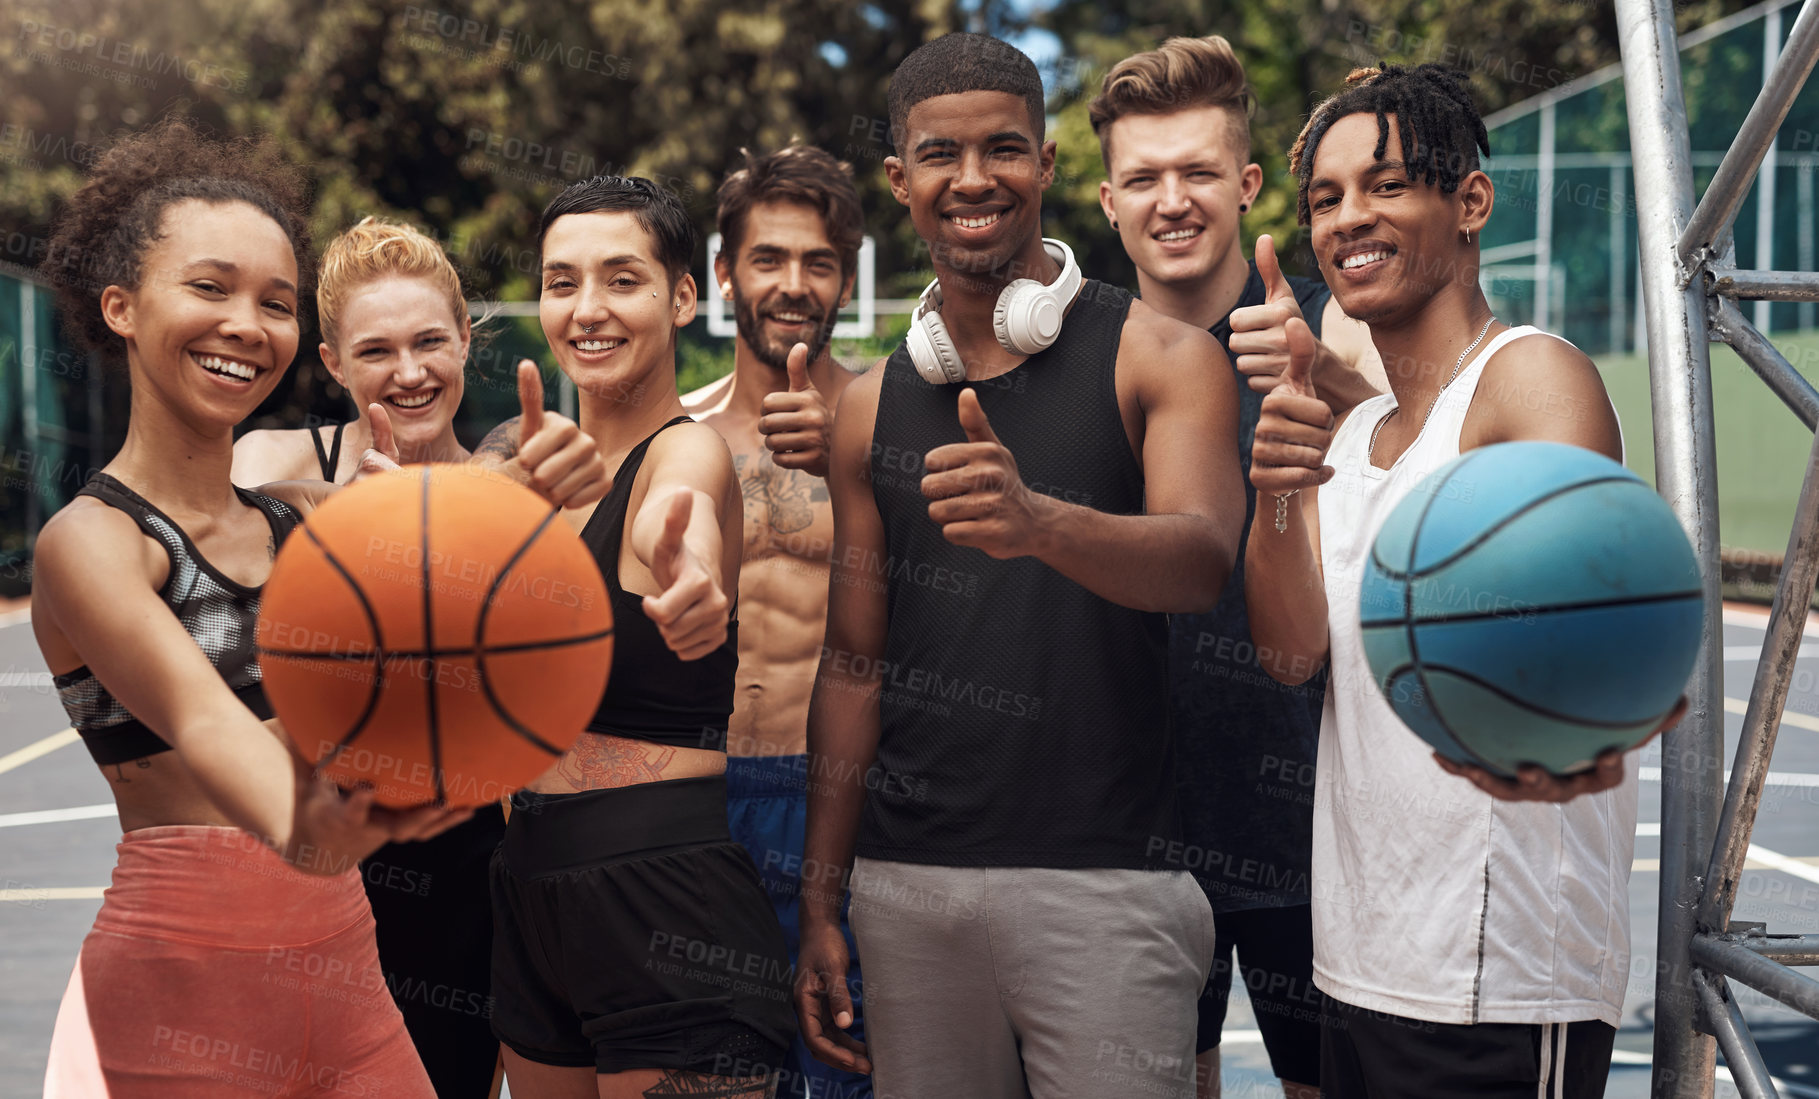 Buy stock photo Portrait of a group of sporty young people showing thumbs up while standing together on a sports court